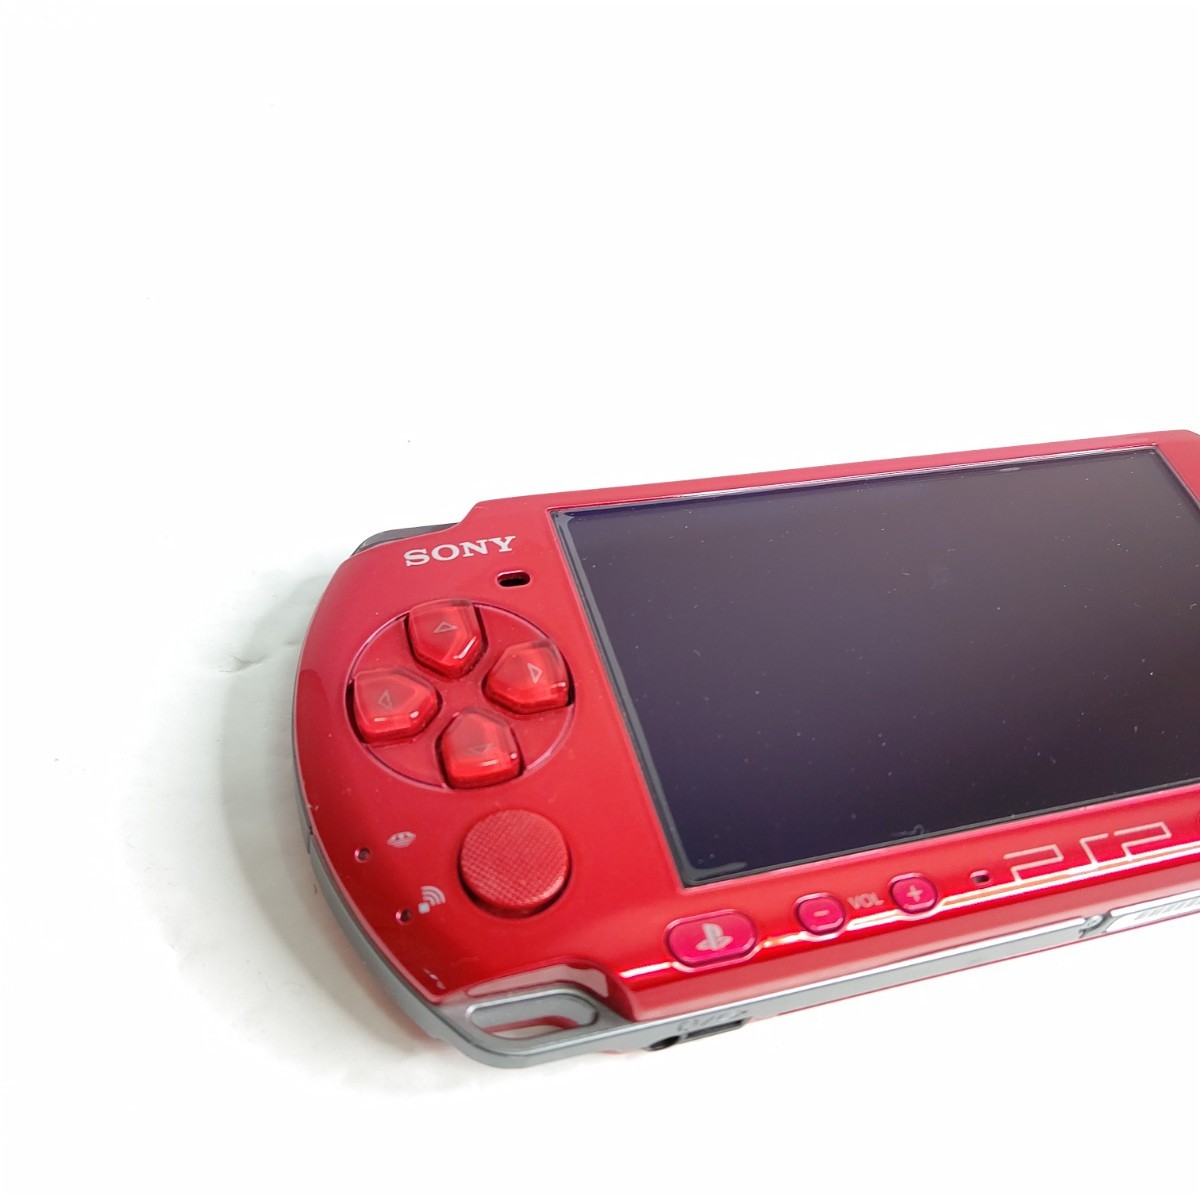 SONY　PSP3000 ラディアントレッド　極美品　ソニー　ゲーム機